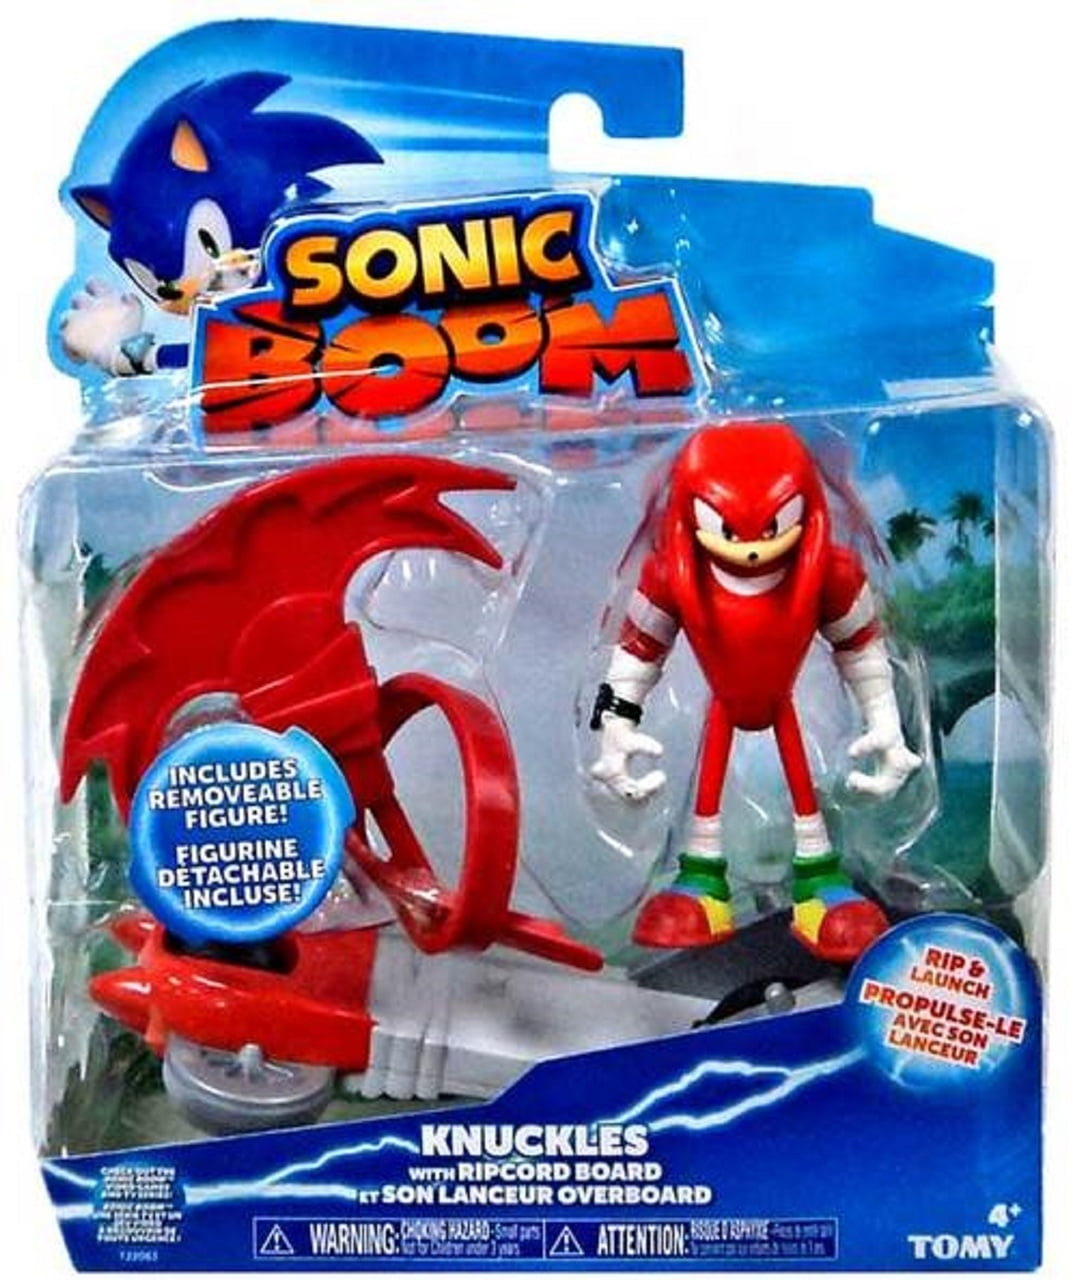 Sonic The Hedgehog Sonic Boom Classic Sonic, Classic Knuckles Classic Tails  3 Action Figure 3-Pack 3 Rings, Damaged Package TOMY, Inc. - ToyWiz